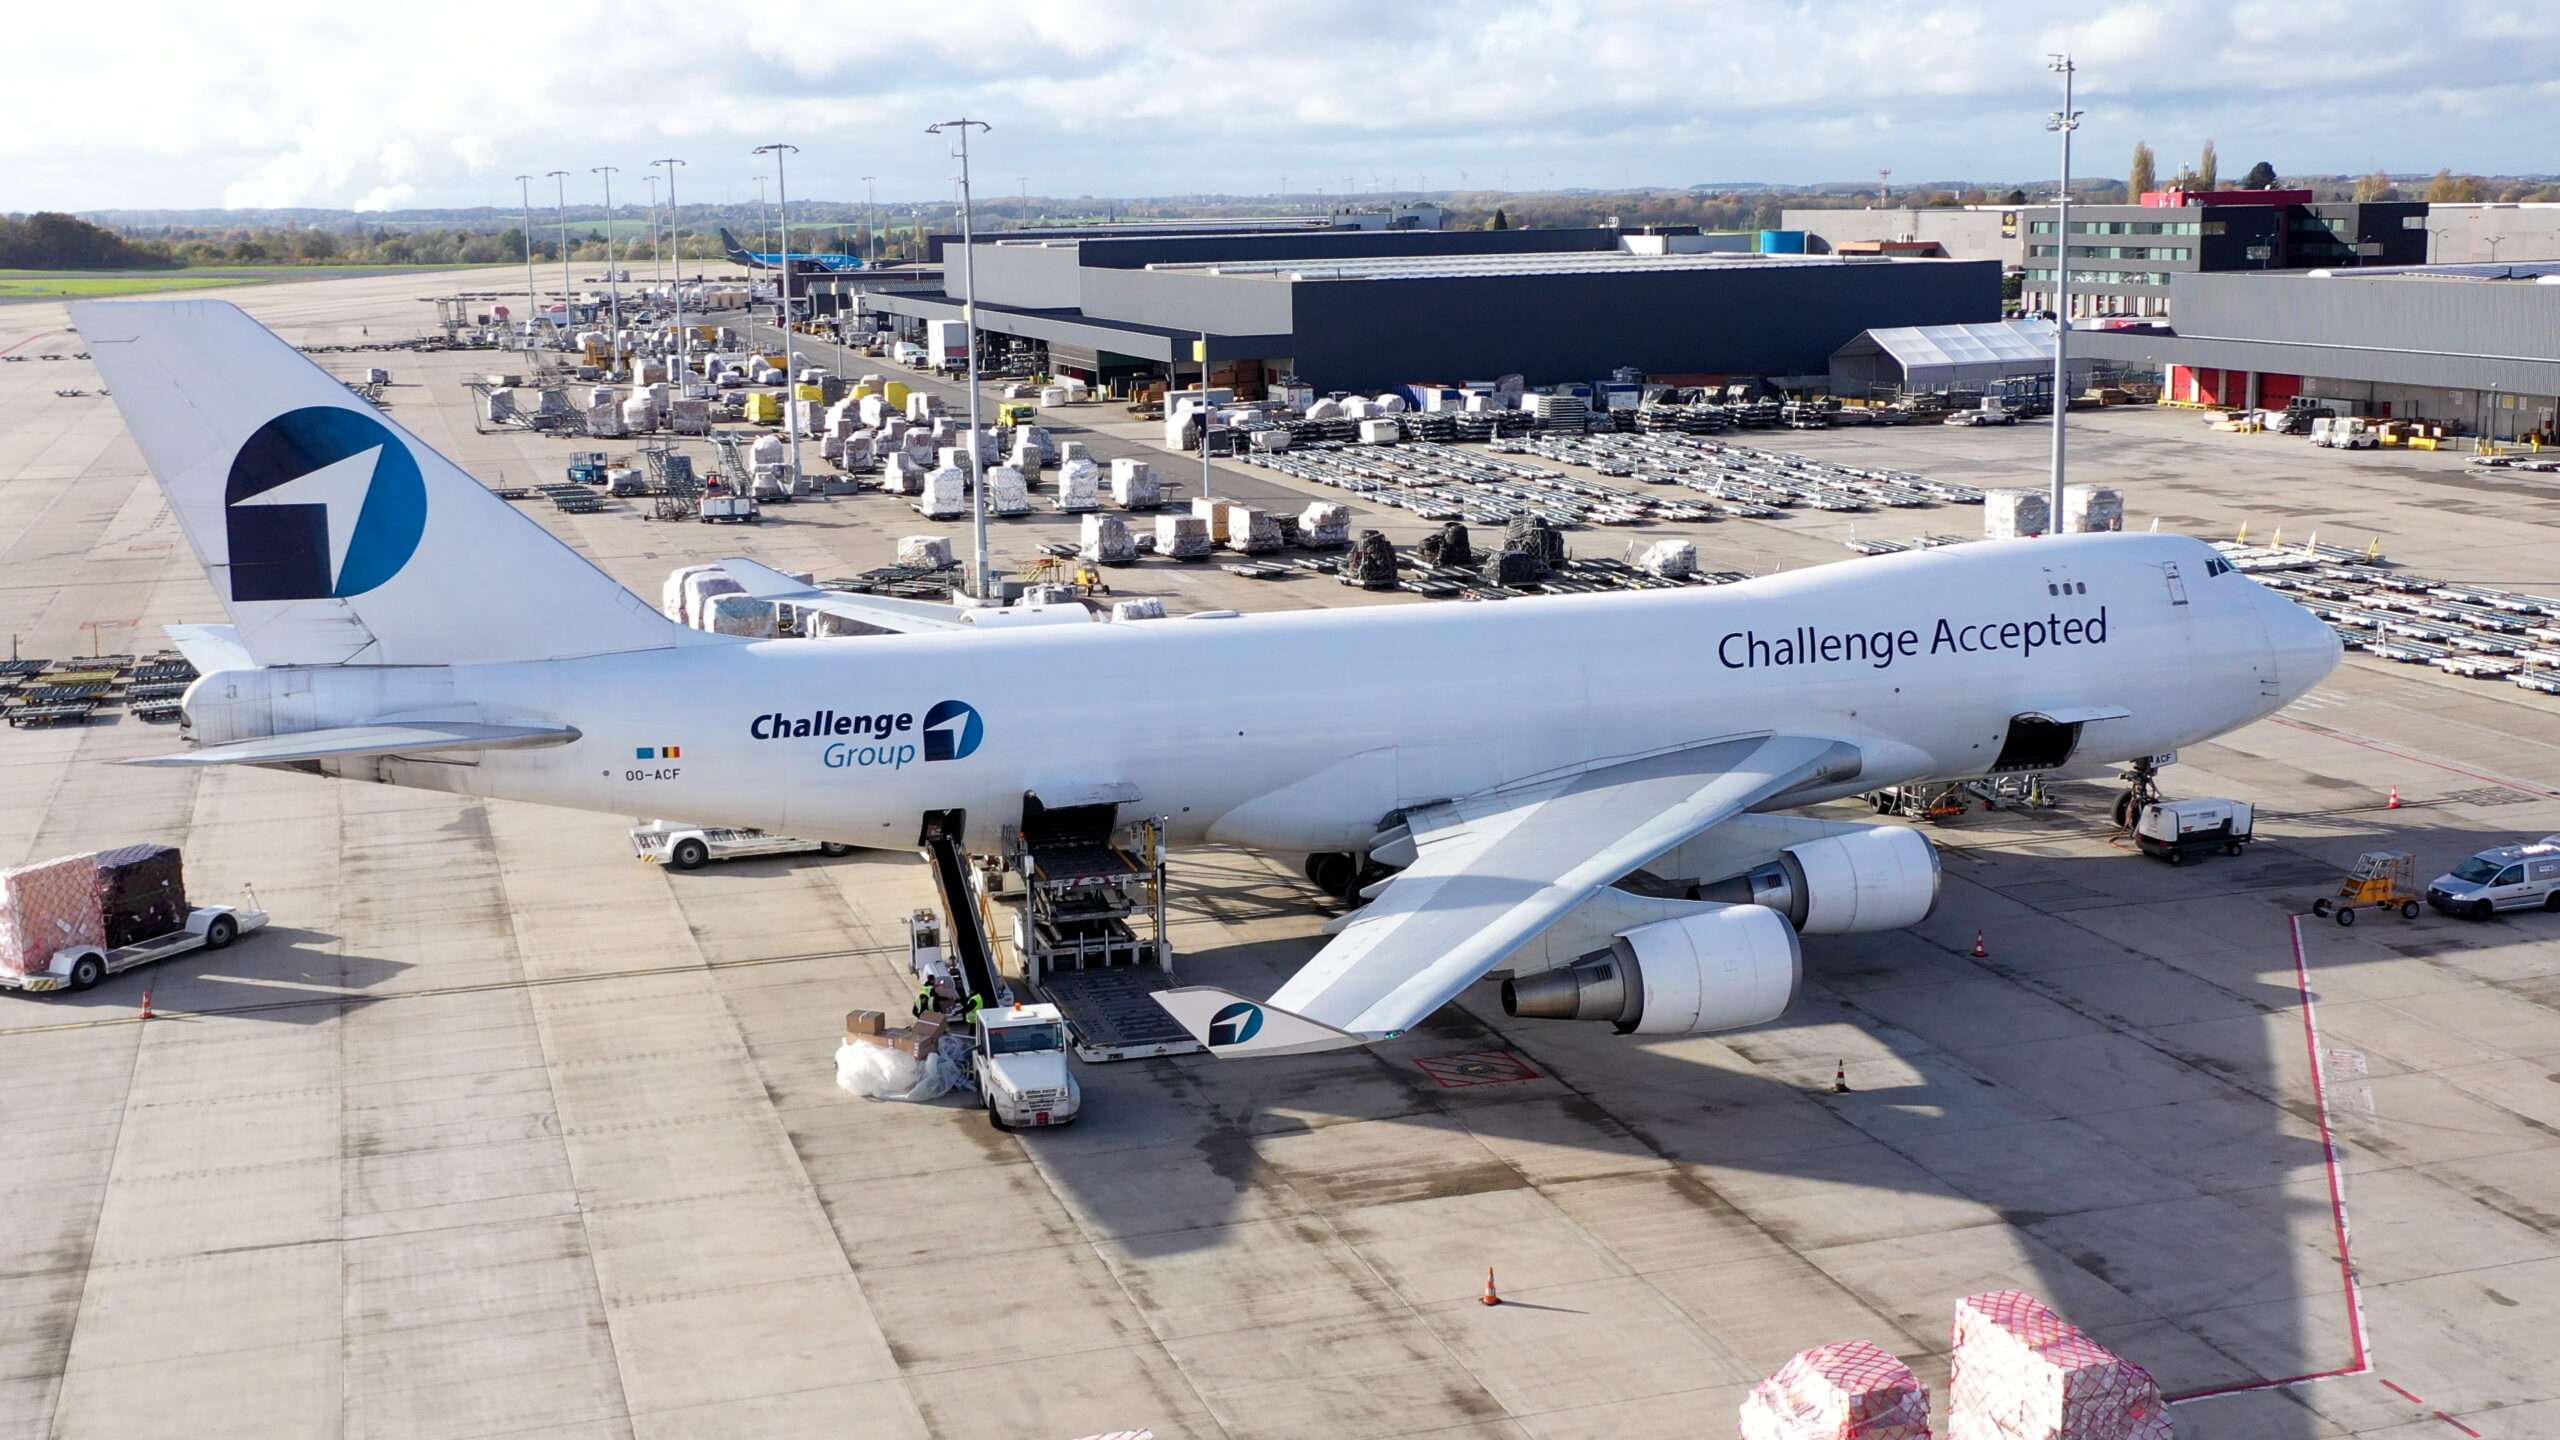 Challenge Group Adds an Extra 747 Freighter